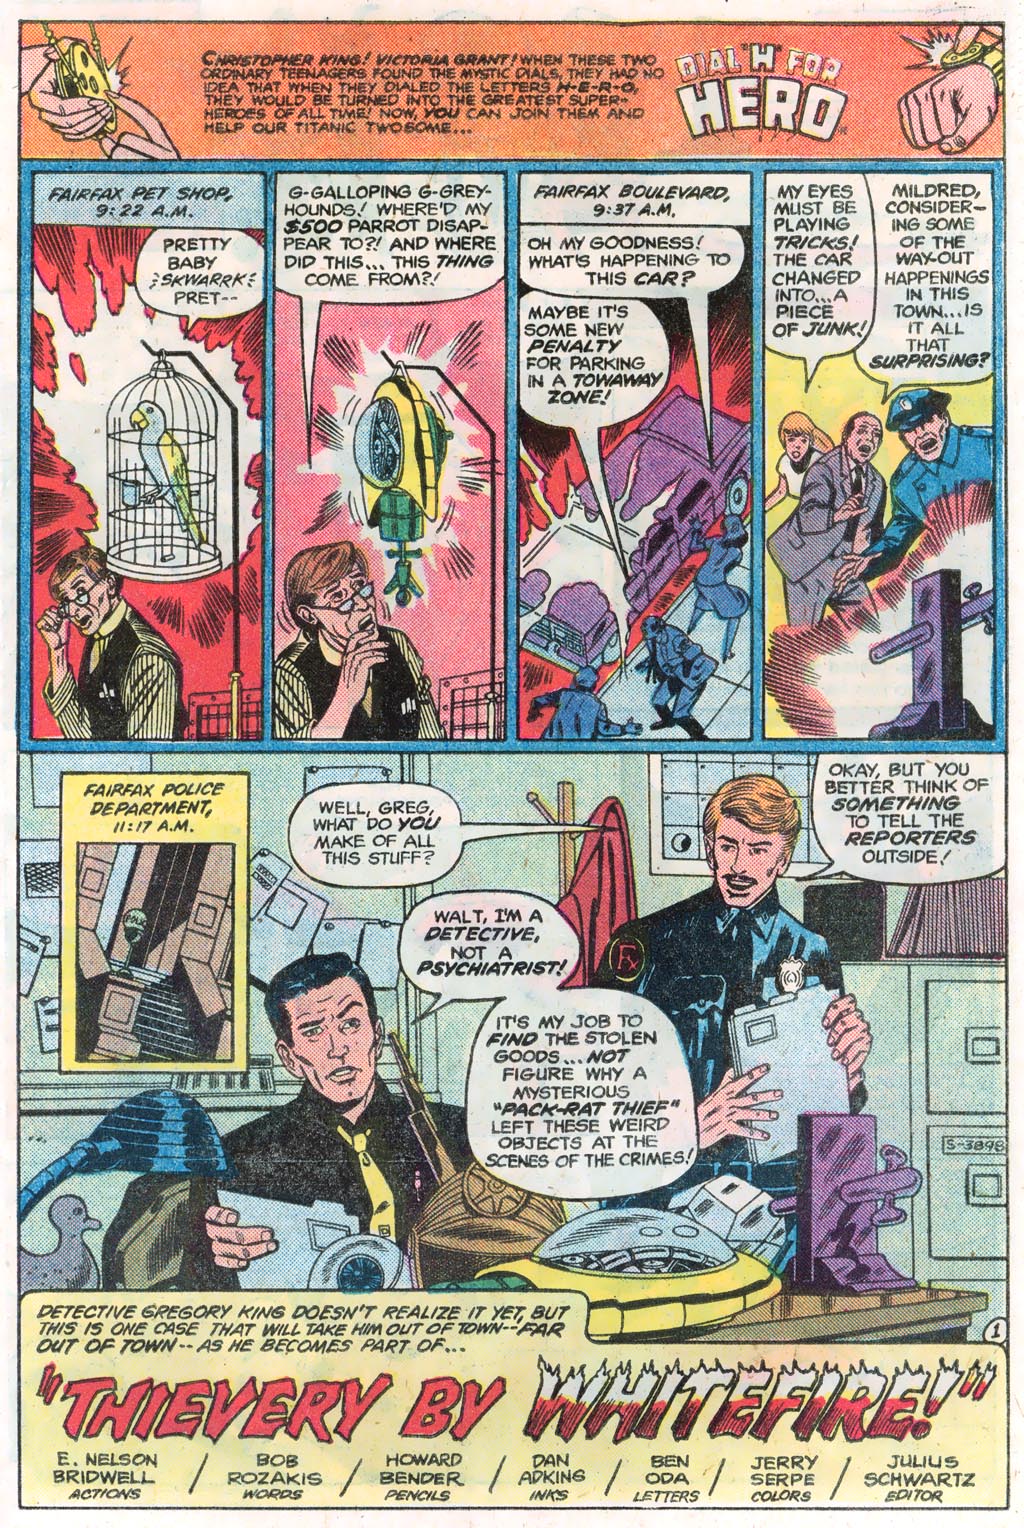 The New Adventures of Superboy 31 Page 26